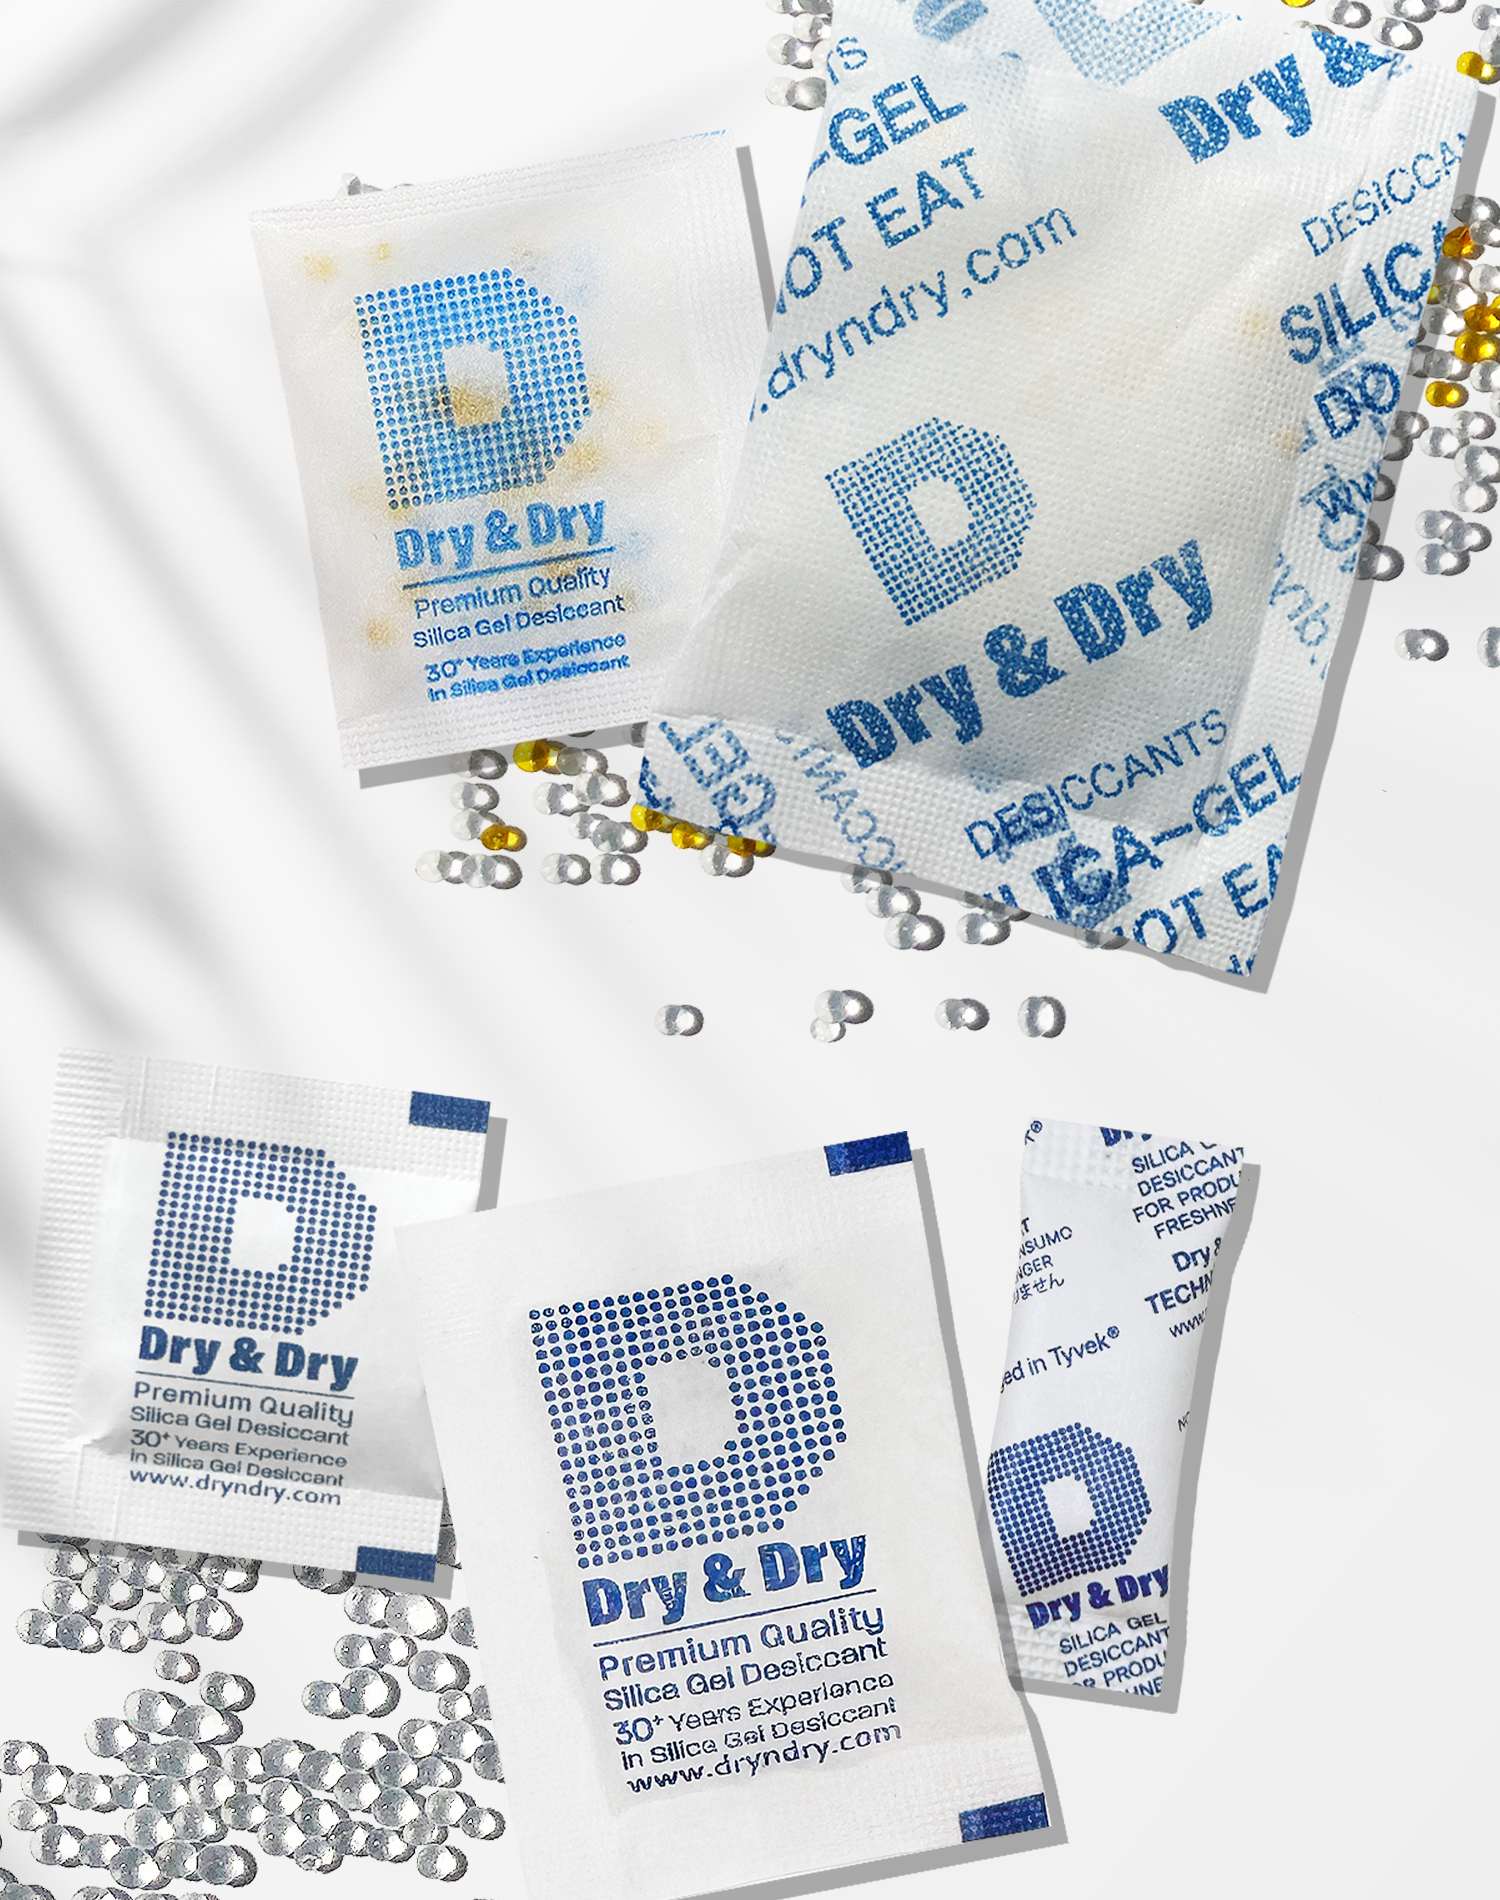 Welcome to Dry & Dry - Premium Quality Silica Gel Desiccant